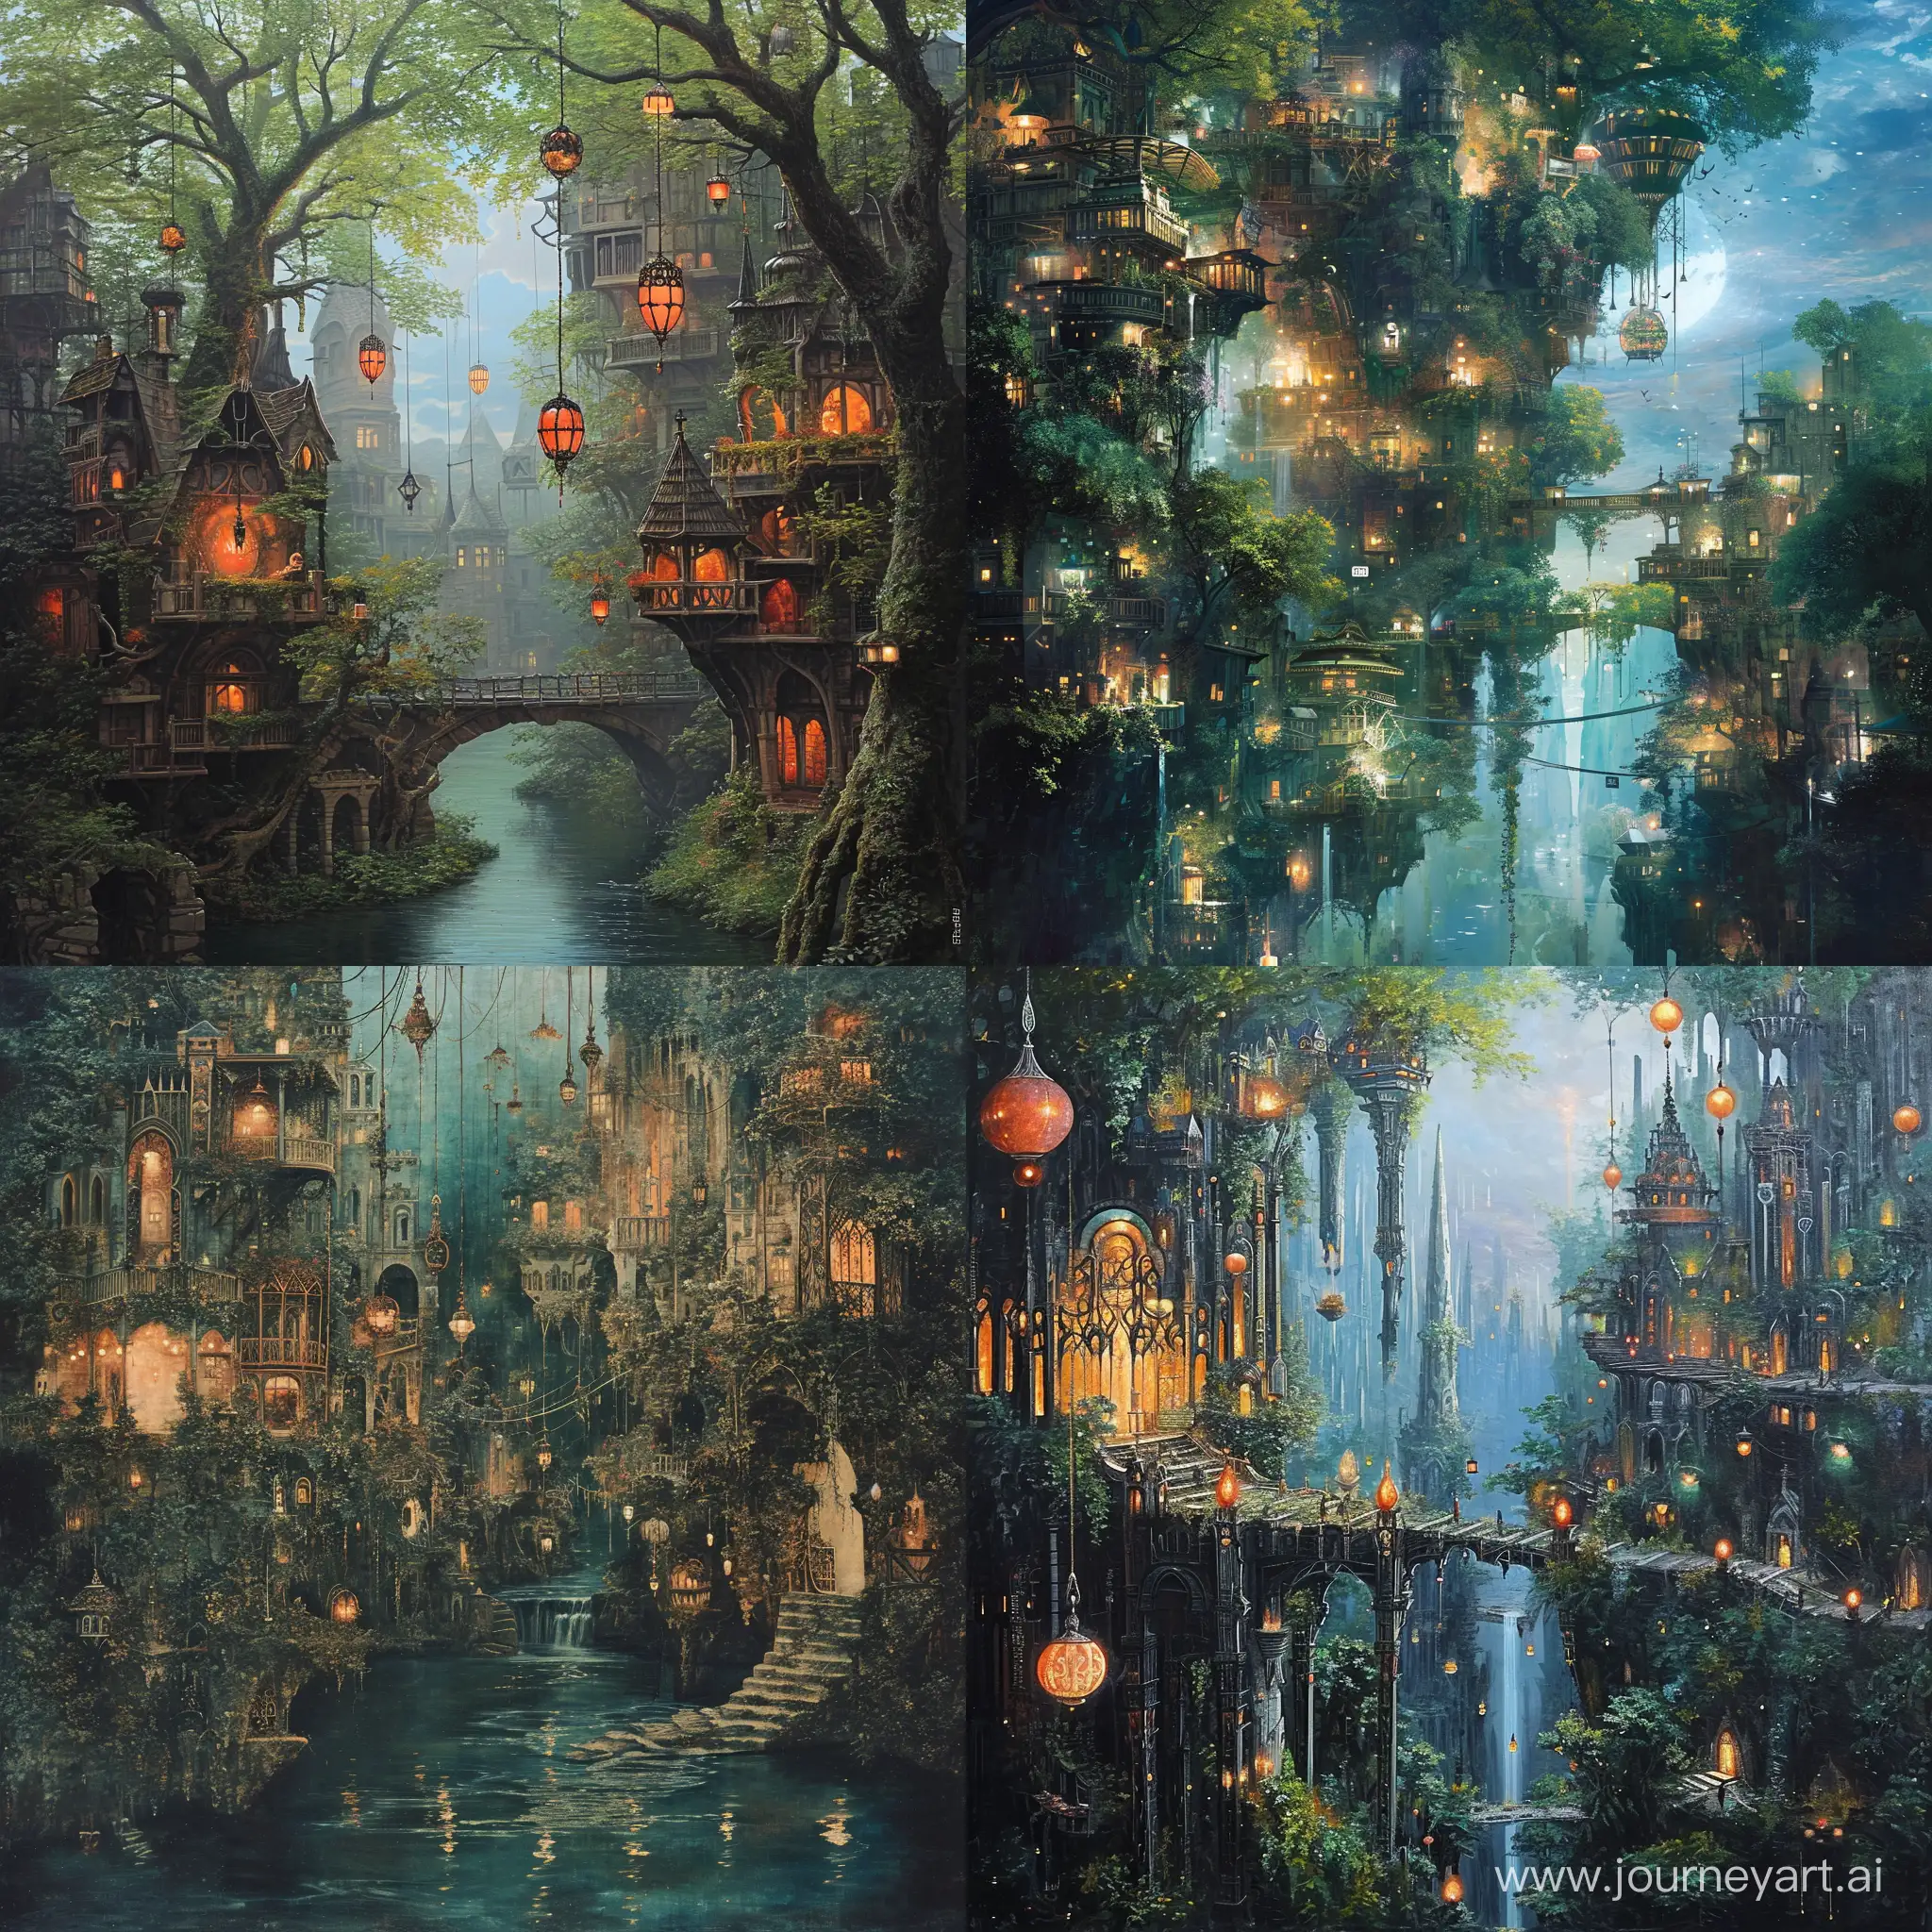 Fantastical-Cityscape-with-River-and-Hanging-Lanterns